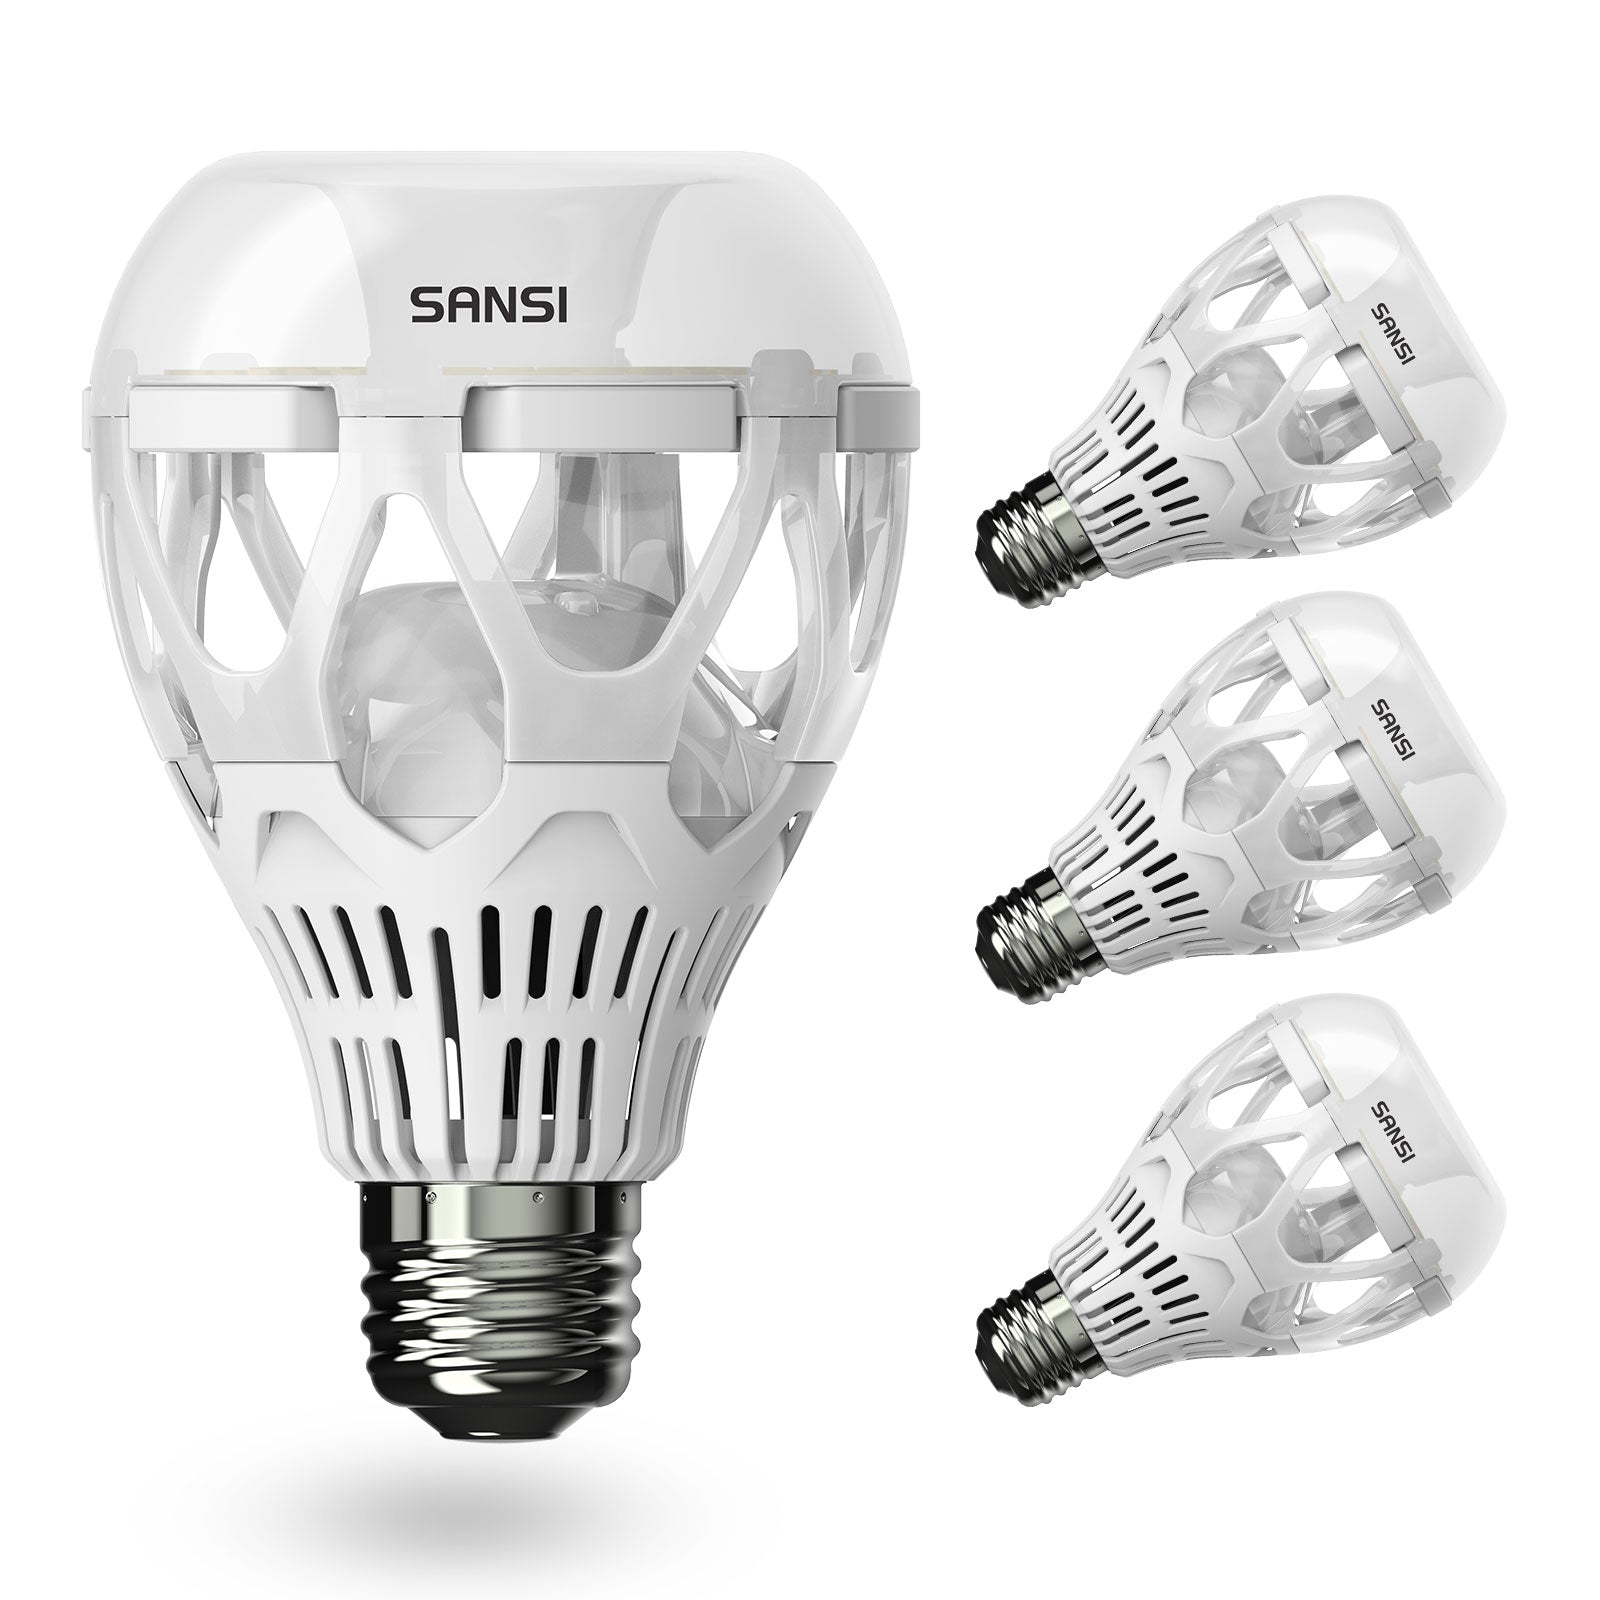 A21 18W led light bulb with energy saving for your home, 4 pack